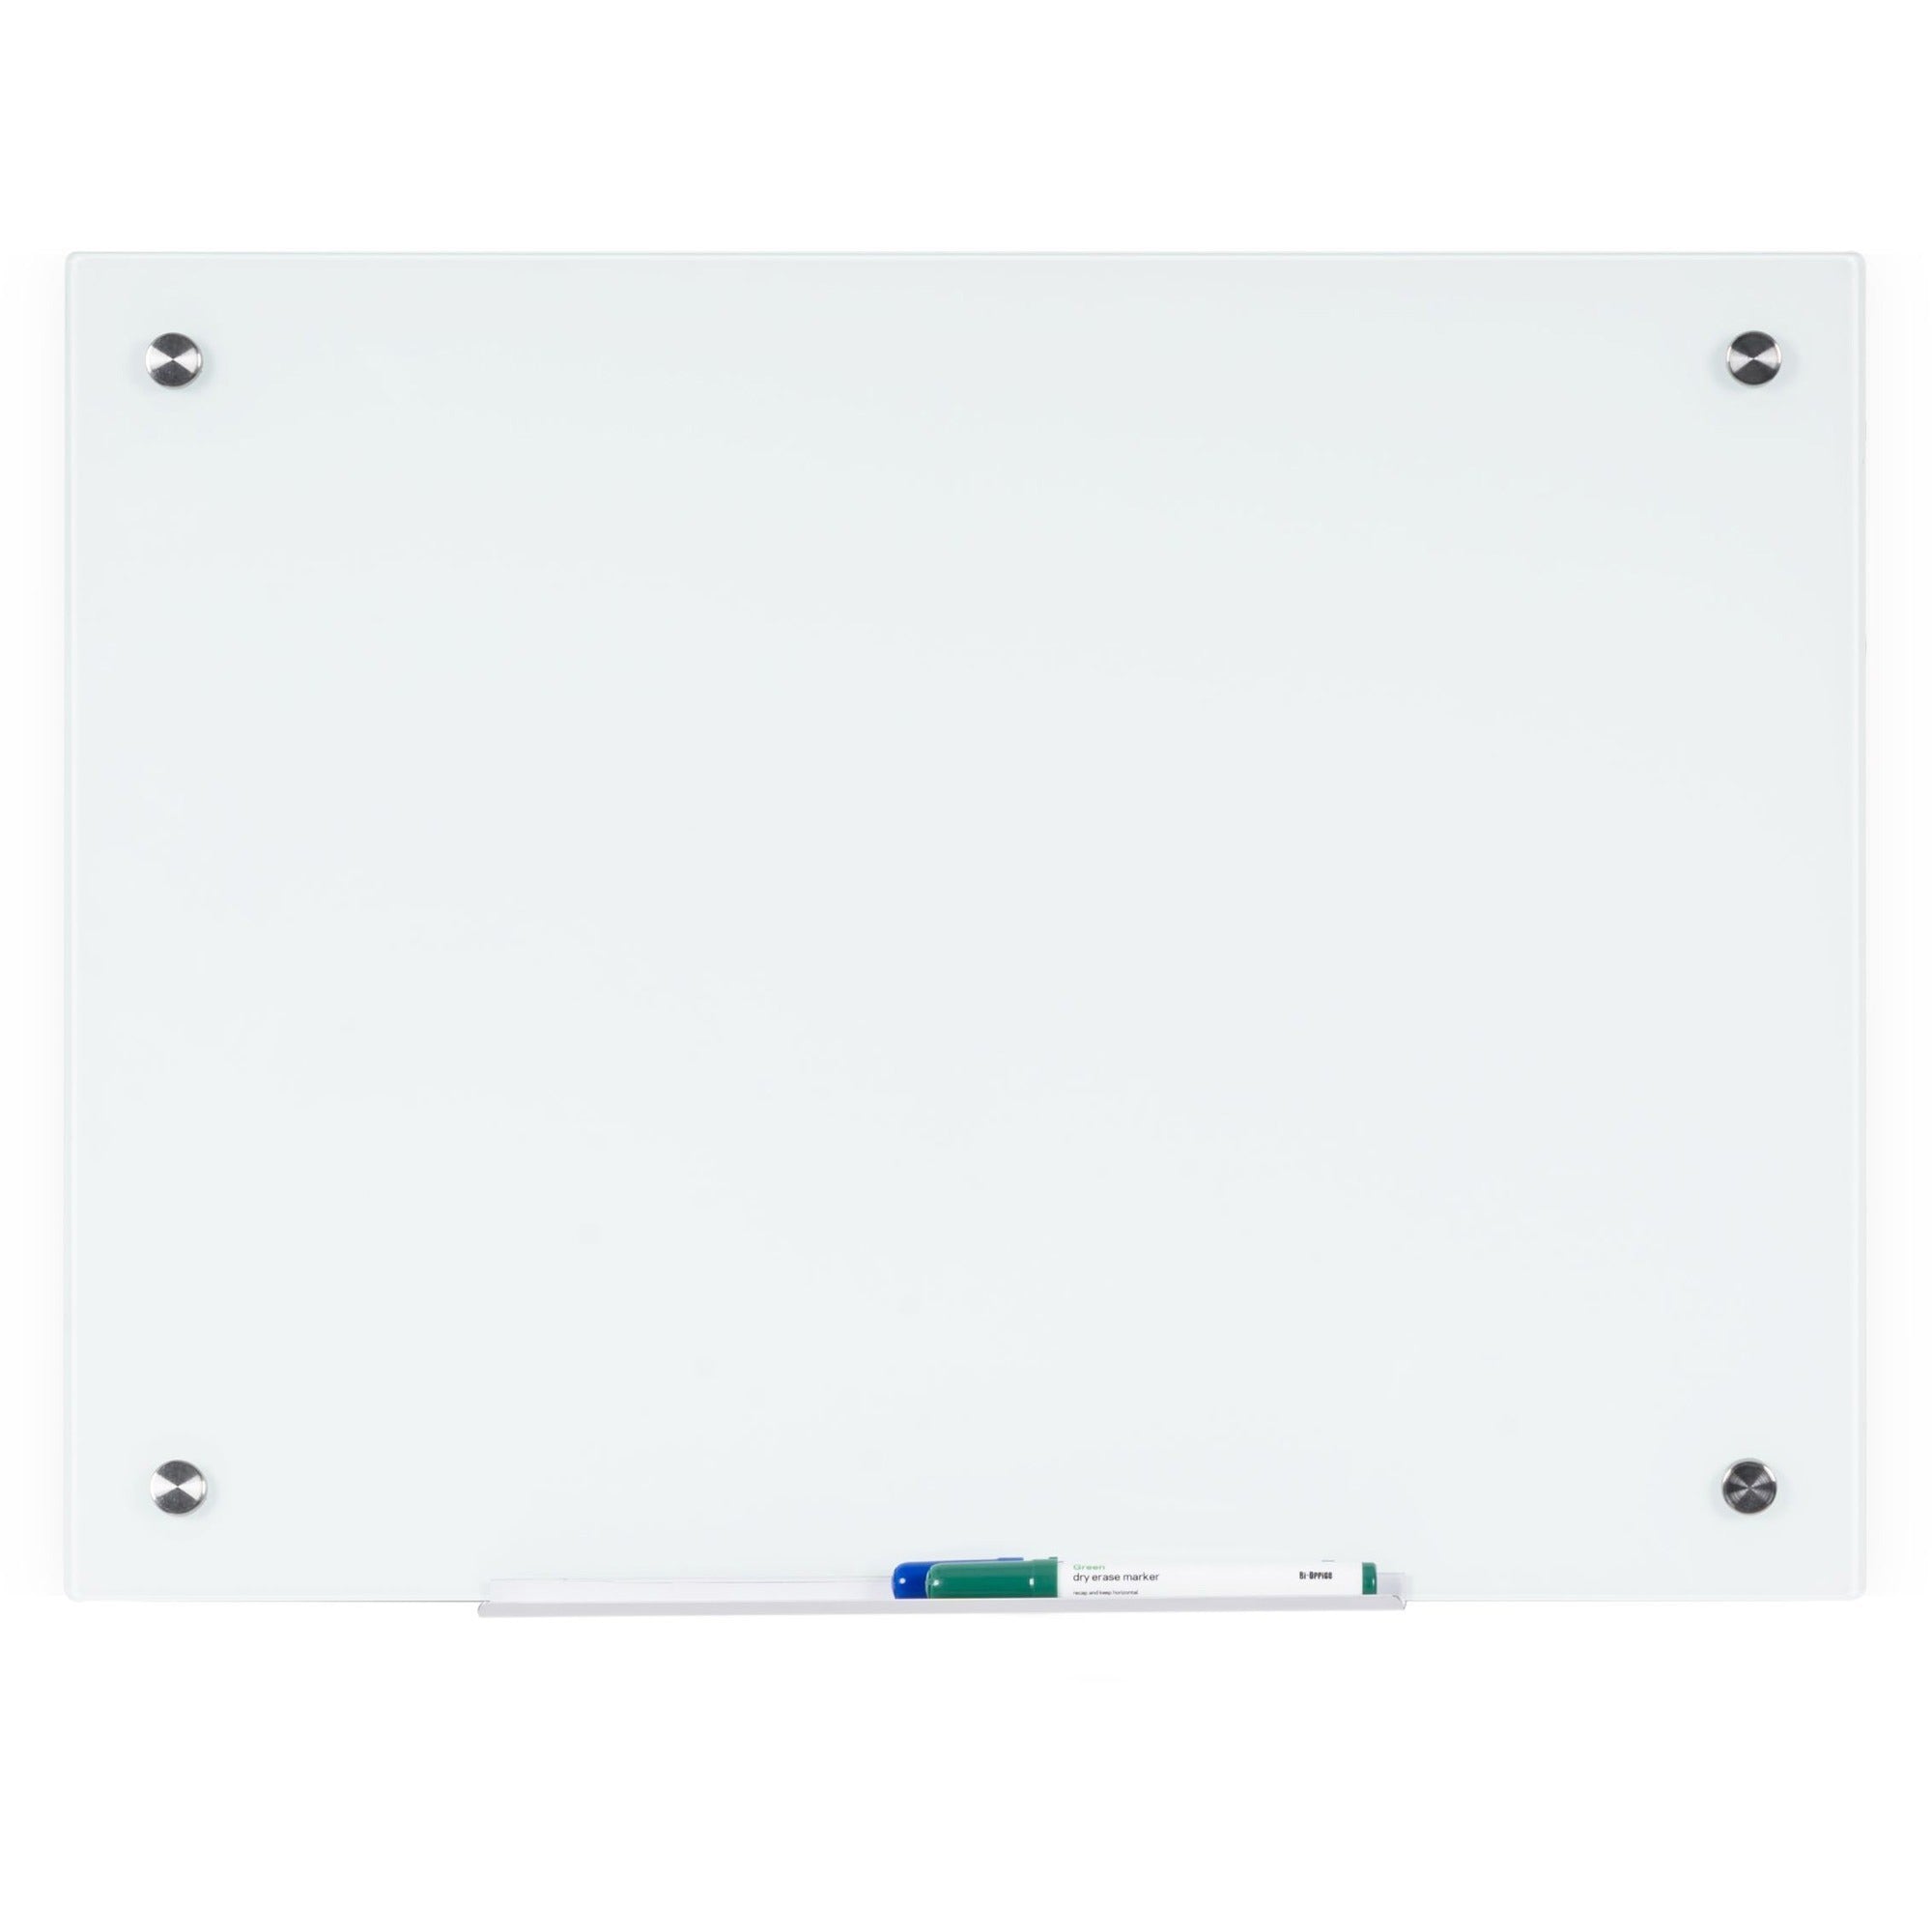 bi-silque-magnetic-glass-dry-erase-board-48-4-ft-width-x-96-8-ft-height-white-glass-surface-rectangle-horizontal-vertical-magnetic-1-each_bvcgl250107 - 1